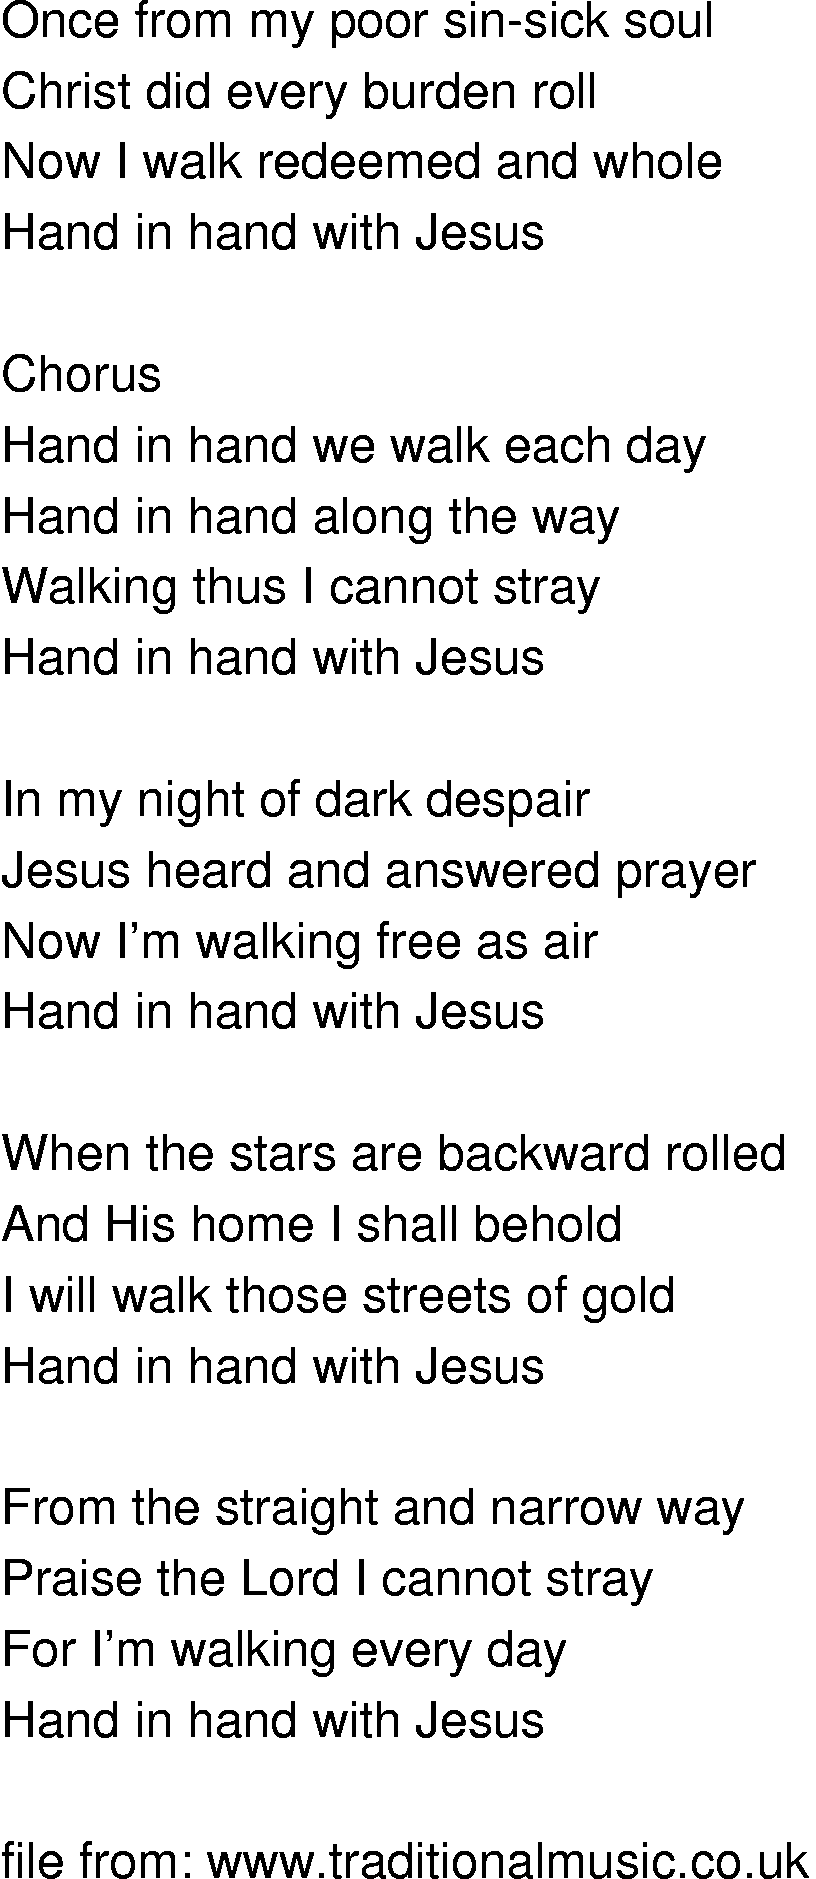 Old-Time (oldtimey) Song Lyrics - hand in hand with jesus